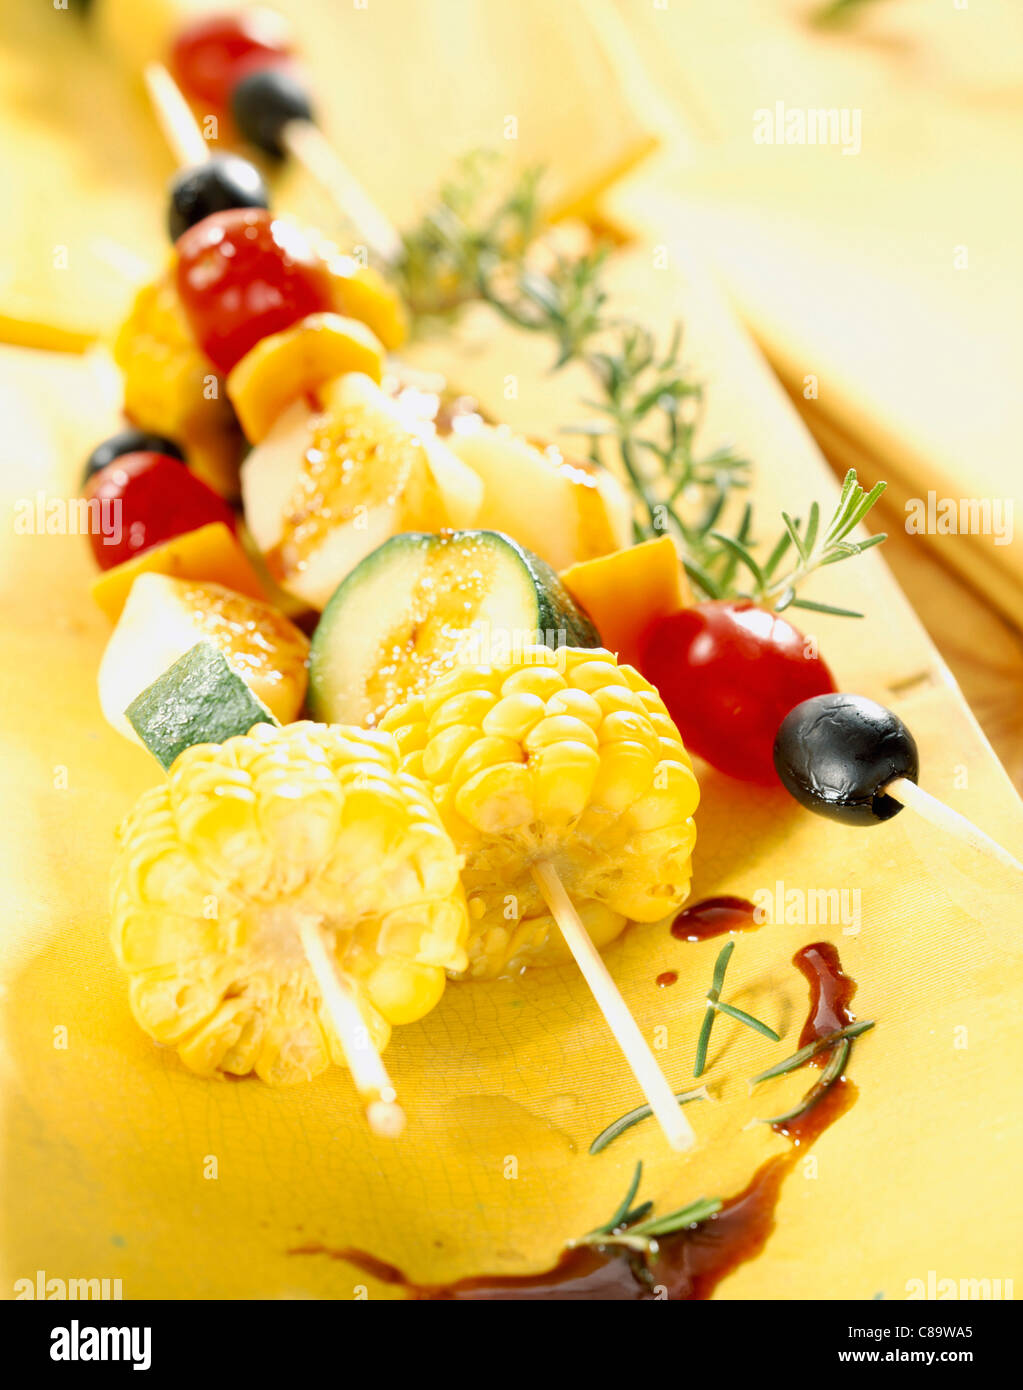 Sweet and sour vegetable kebabs Stock Photo